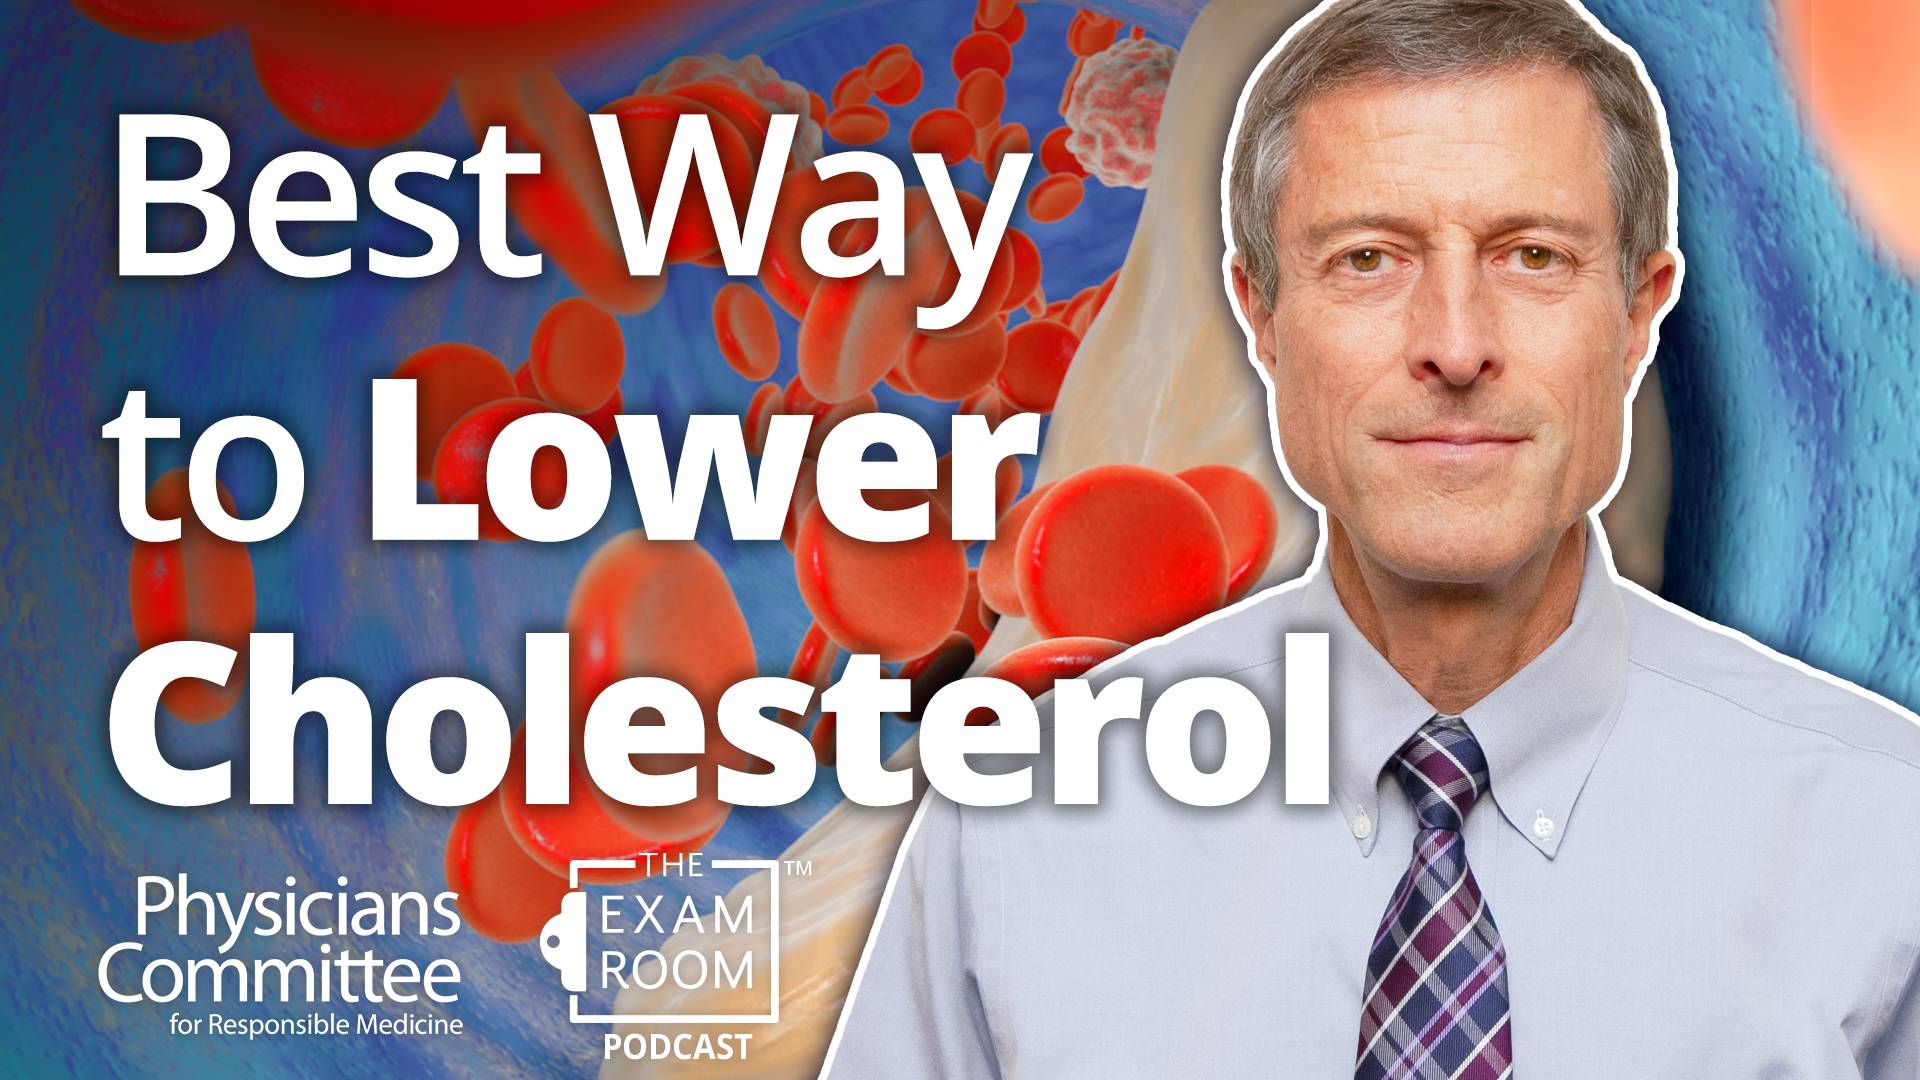 Best Way to Lower Cholesterol